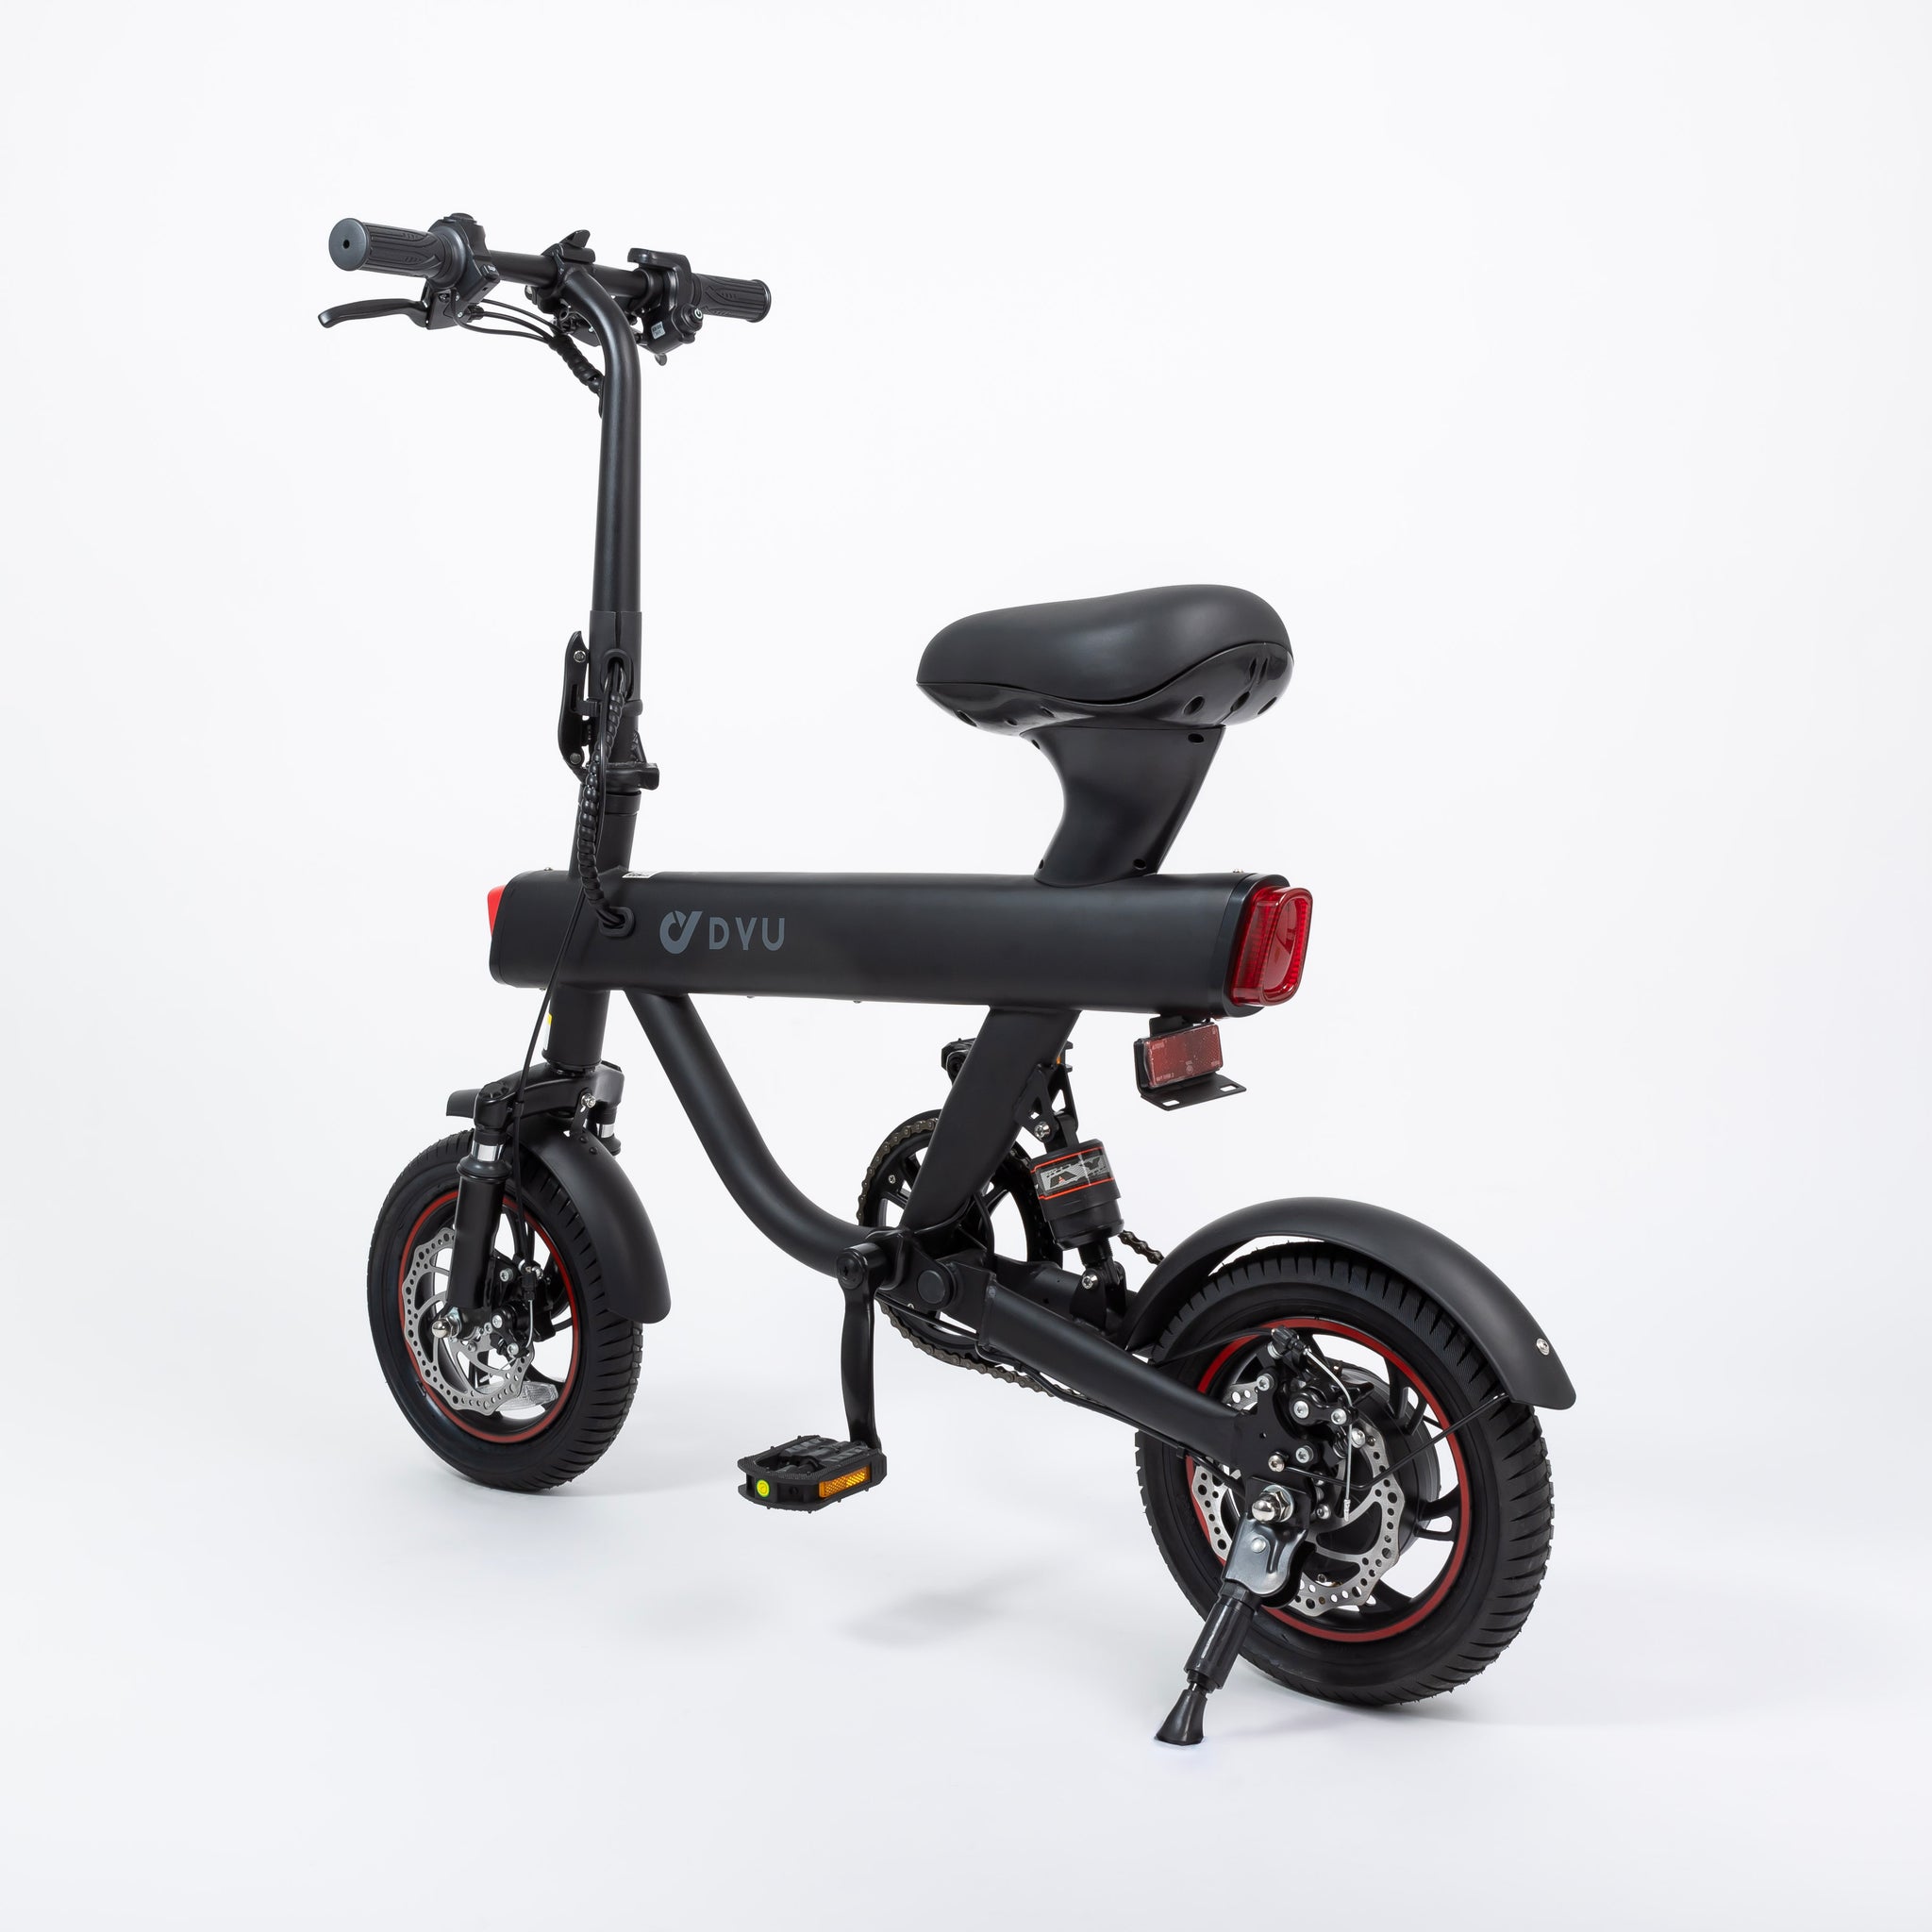 DYU V1 Electric Bike, with suspension, available at Ridezar